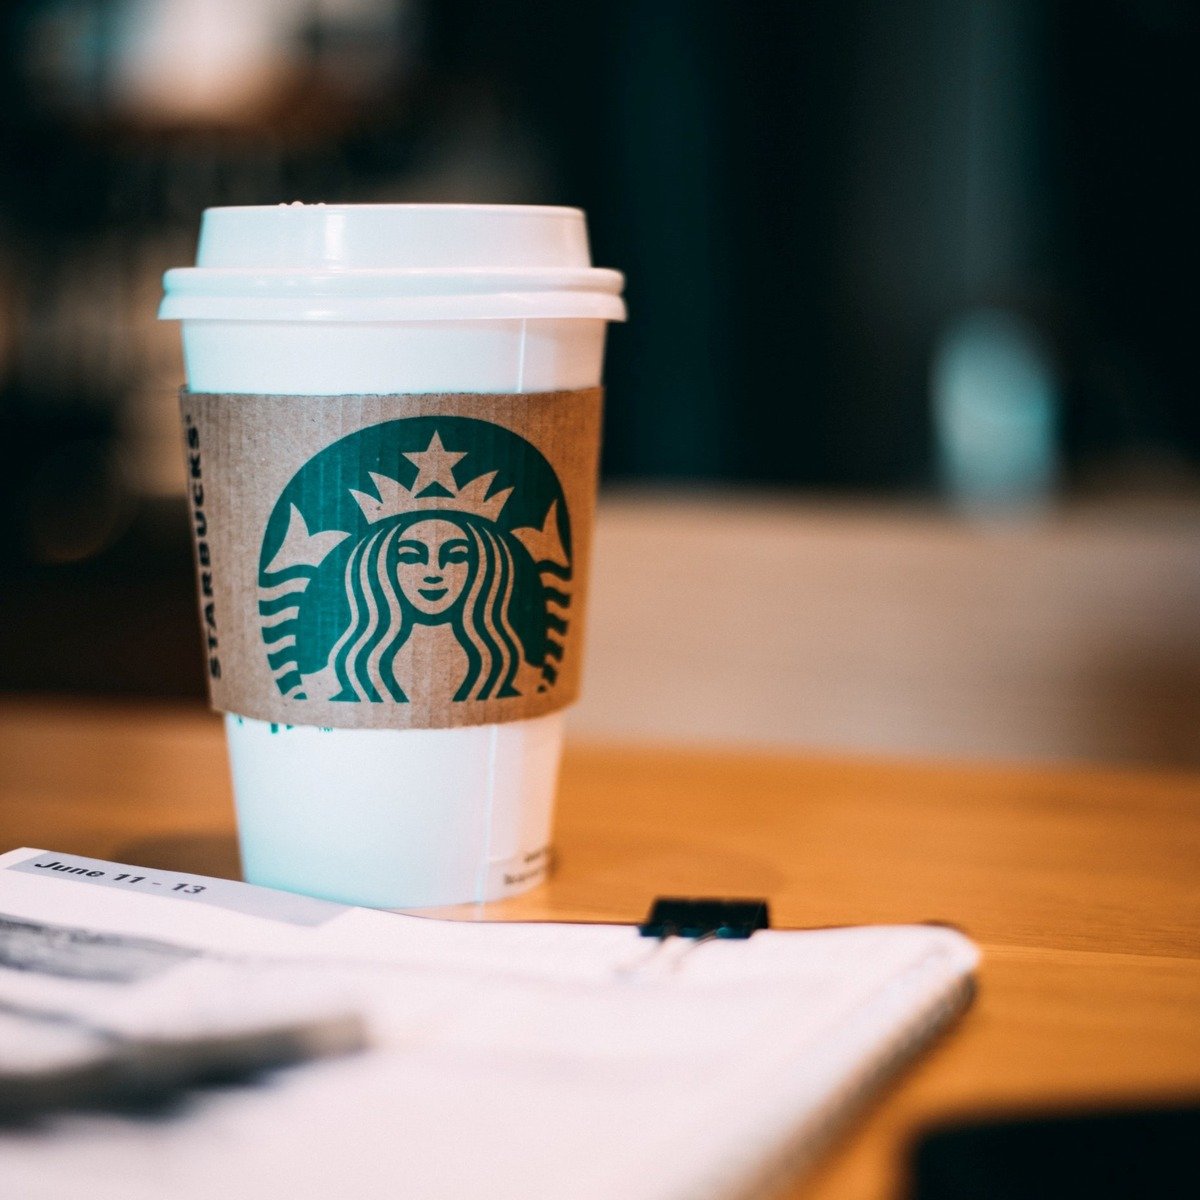 starbucks disposable cup on wooden table beside papers and pen